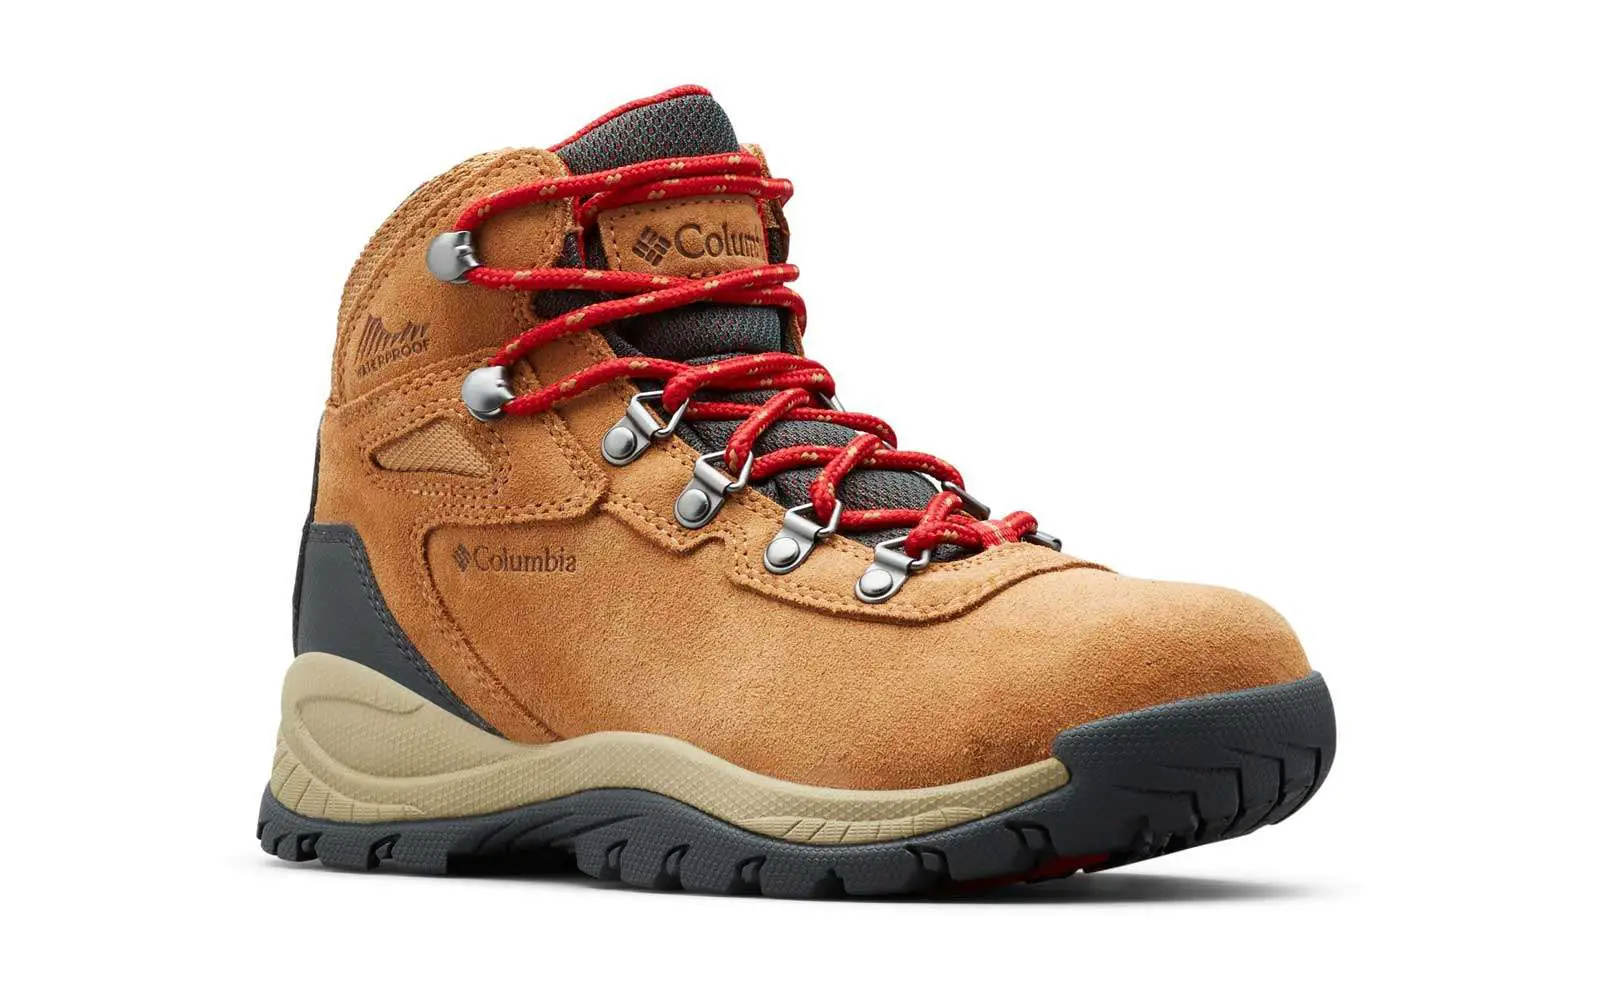 The 18 Best Hiking Shoes and Boots for Women in 2020 ...